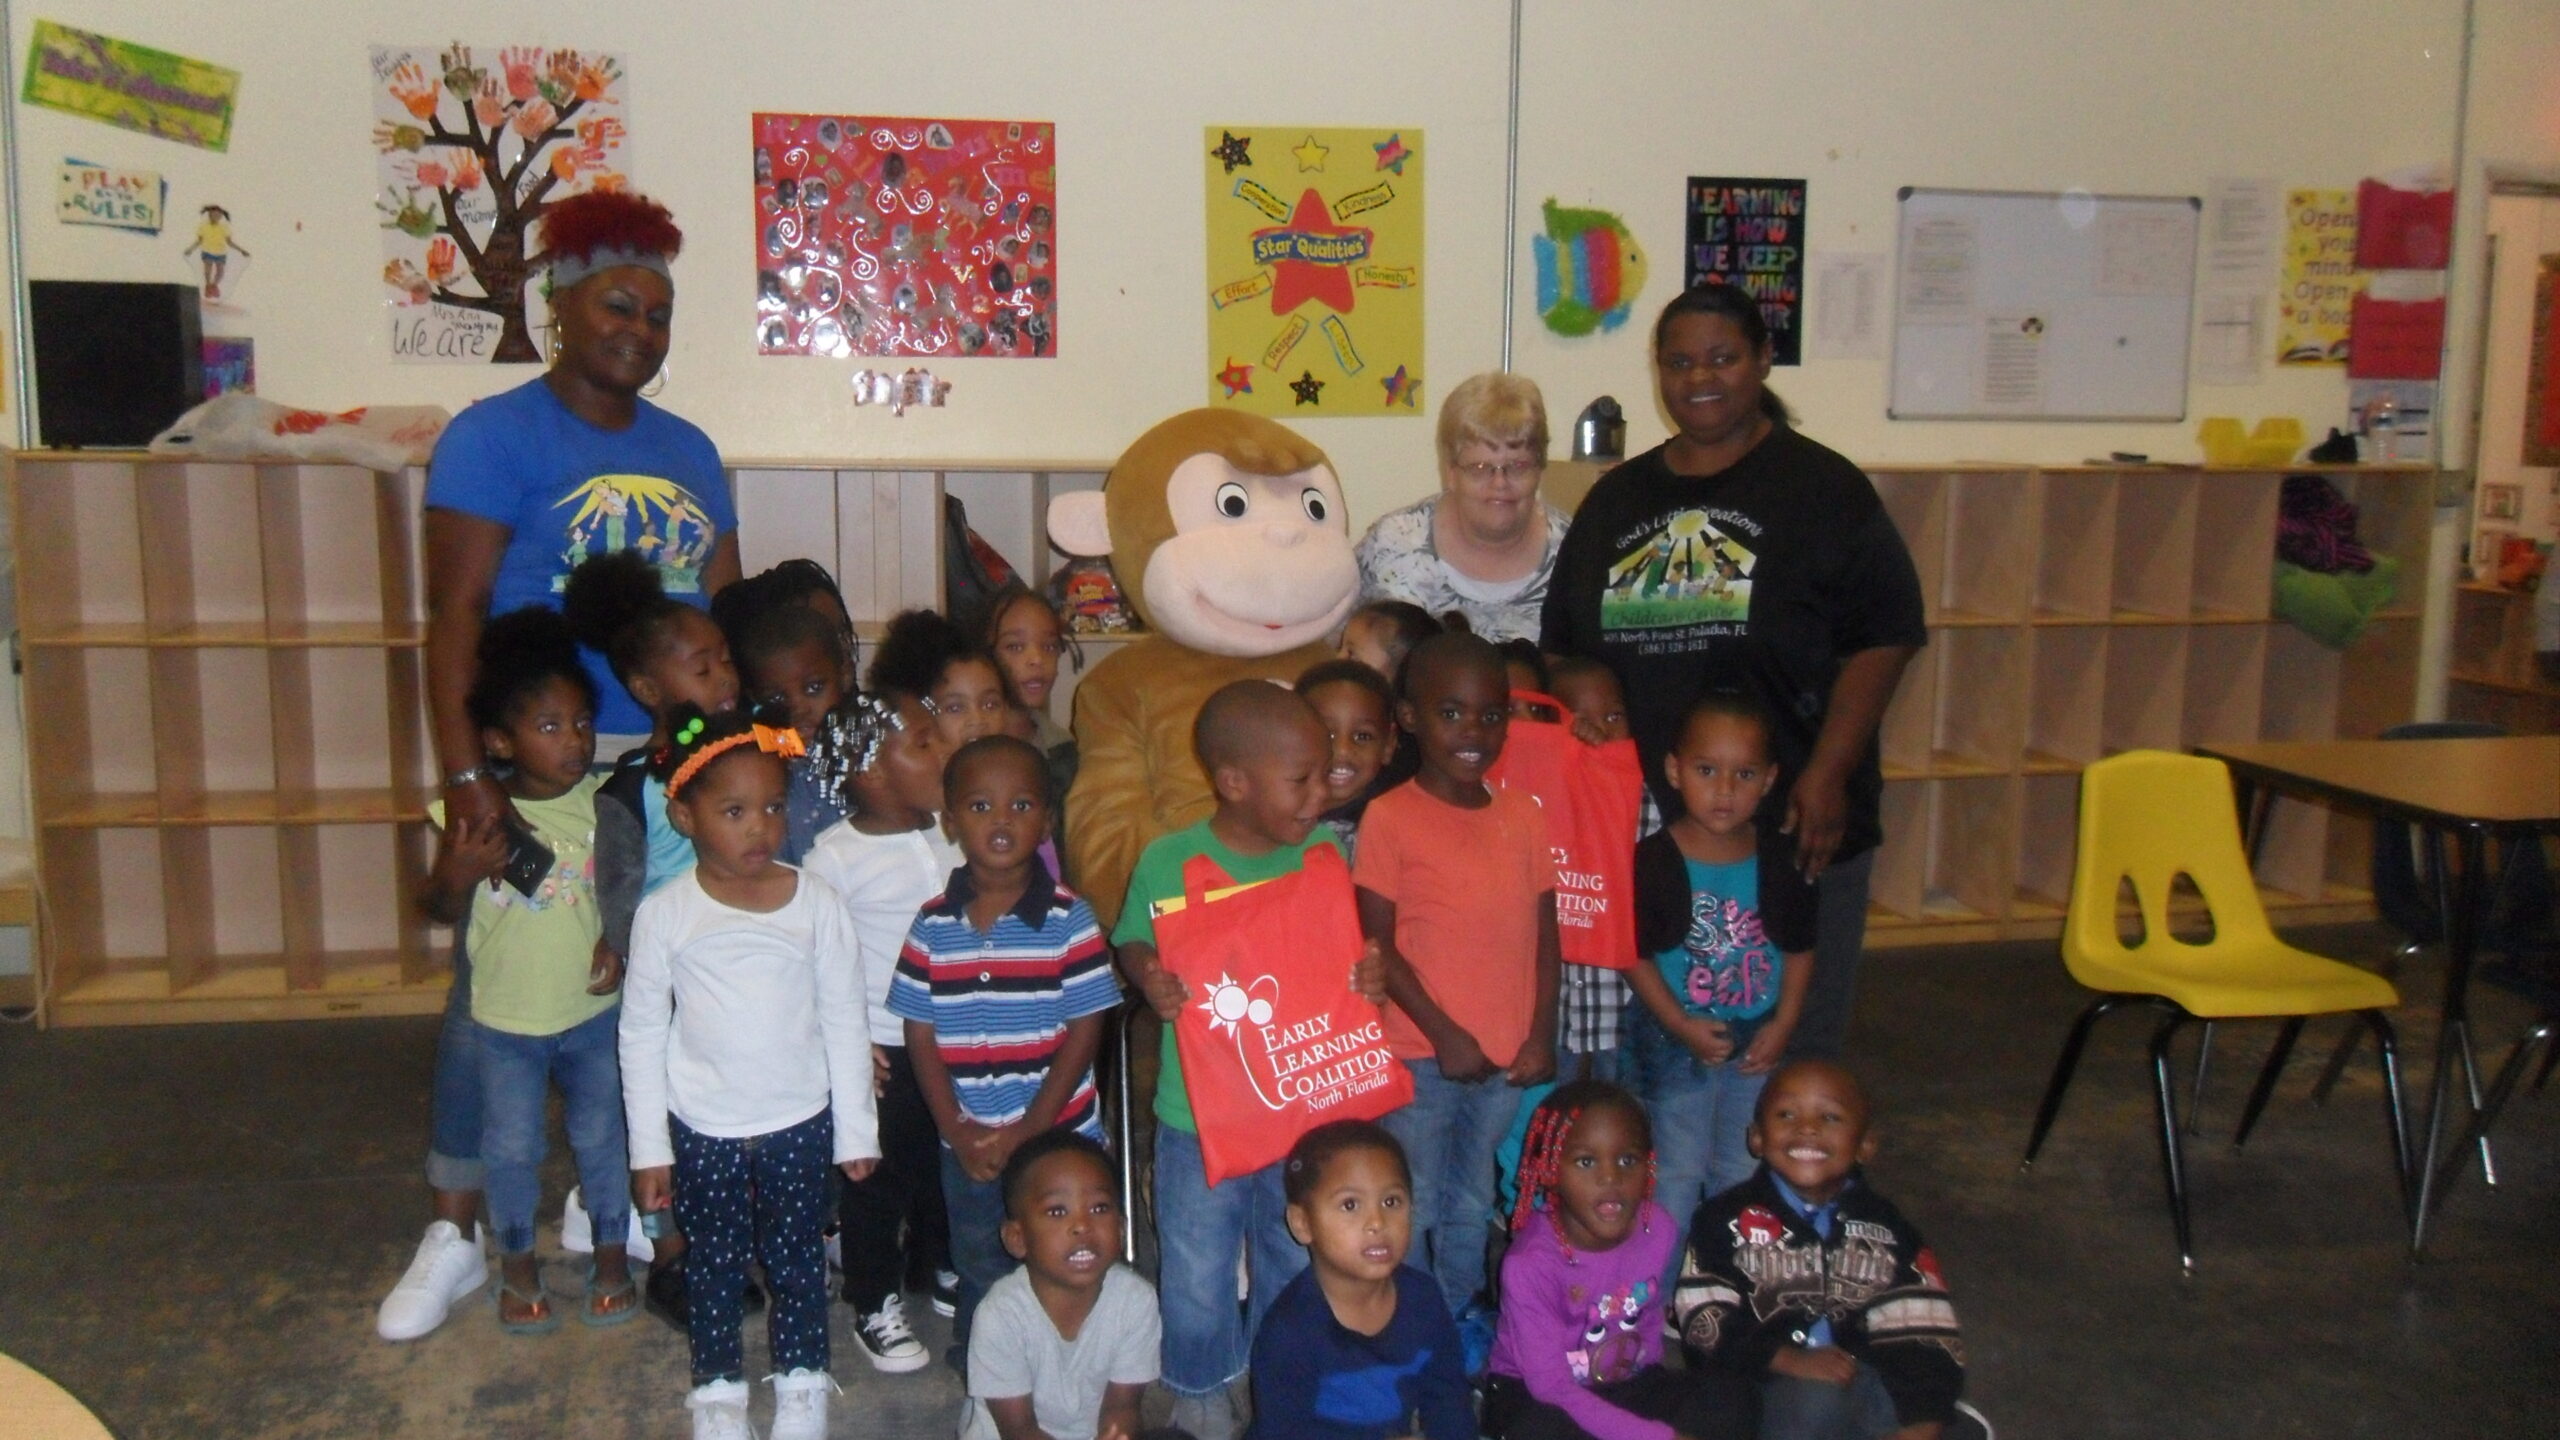 Curious George and ELC of North Florida volunteers deliver book bags to children at God’s Little Creations Learning Center in Palatka.